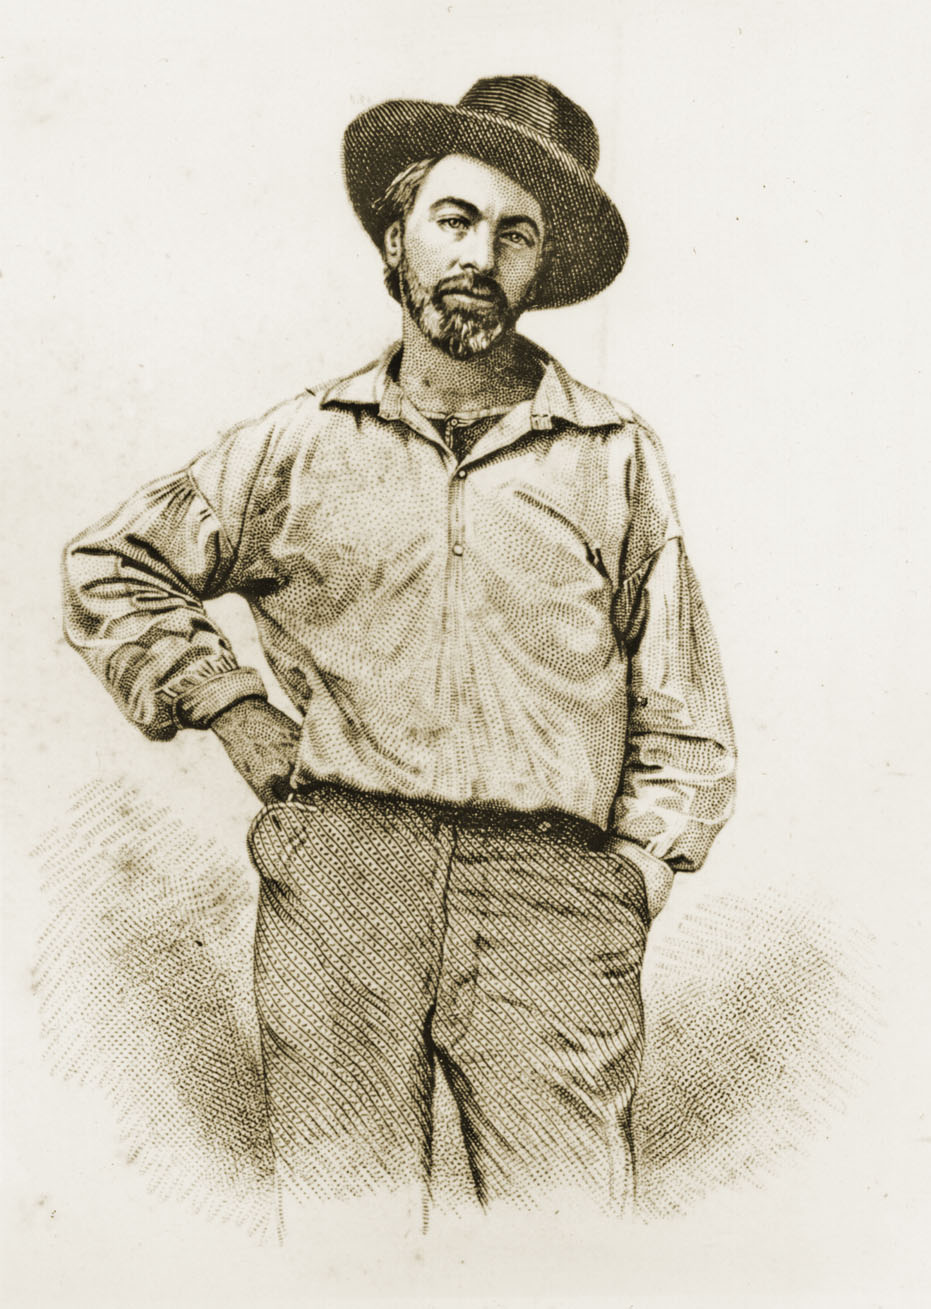 Walt Whitman, frontispiece, first (1855) edition of Leaves of Grass. Stipple engraving by Samuel Hollyer.